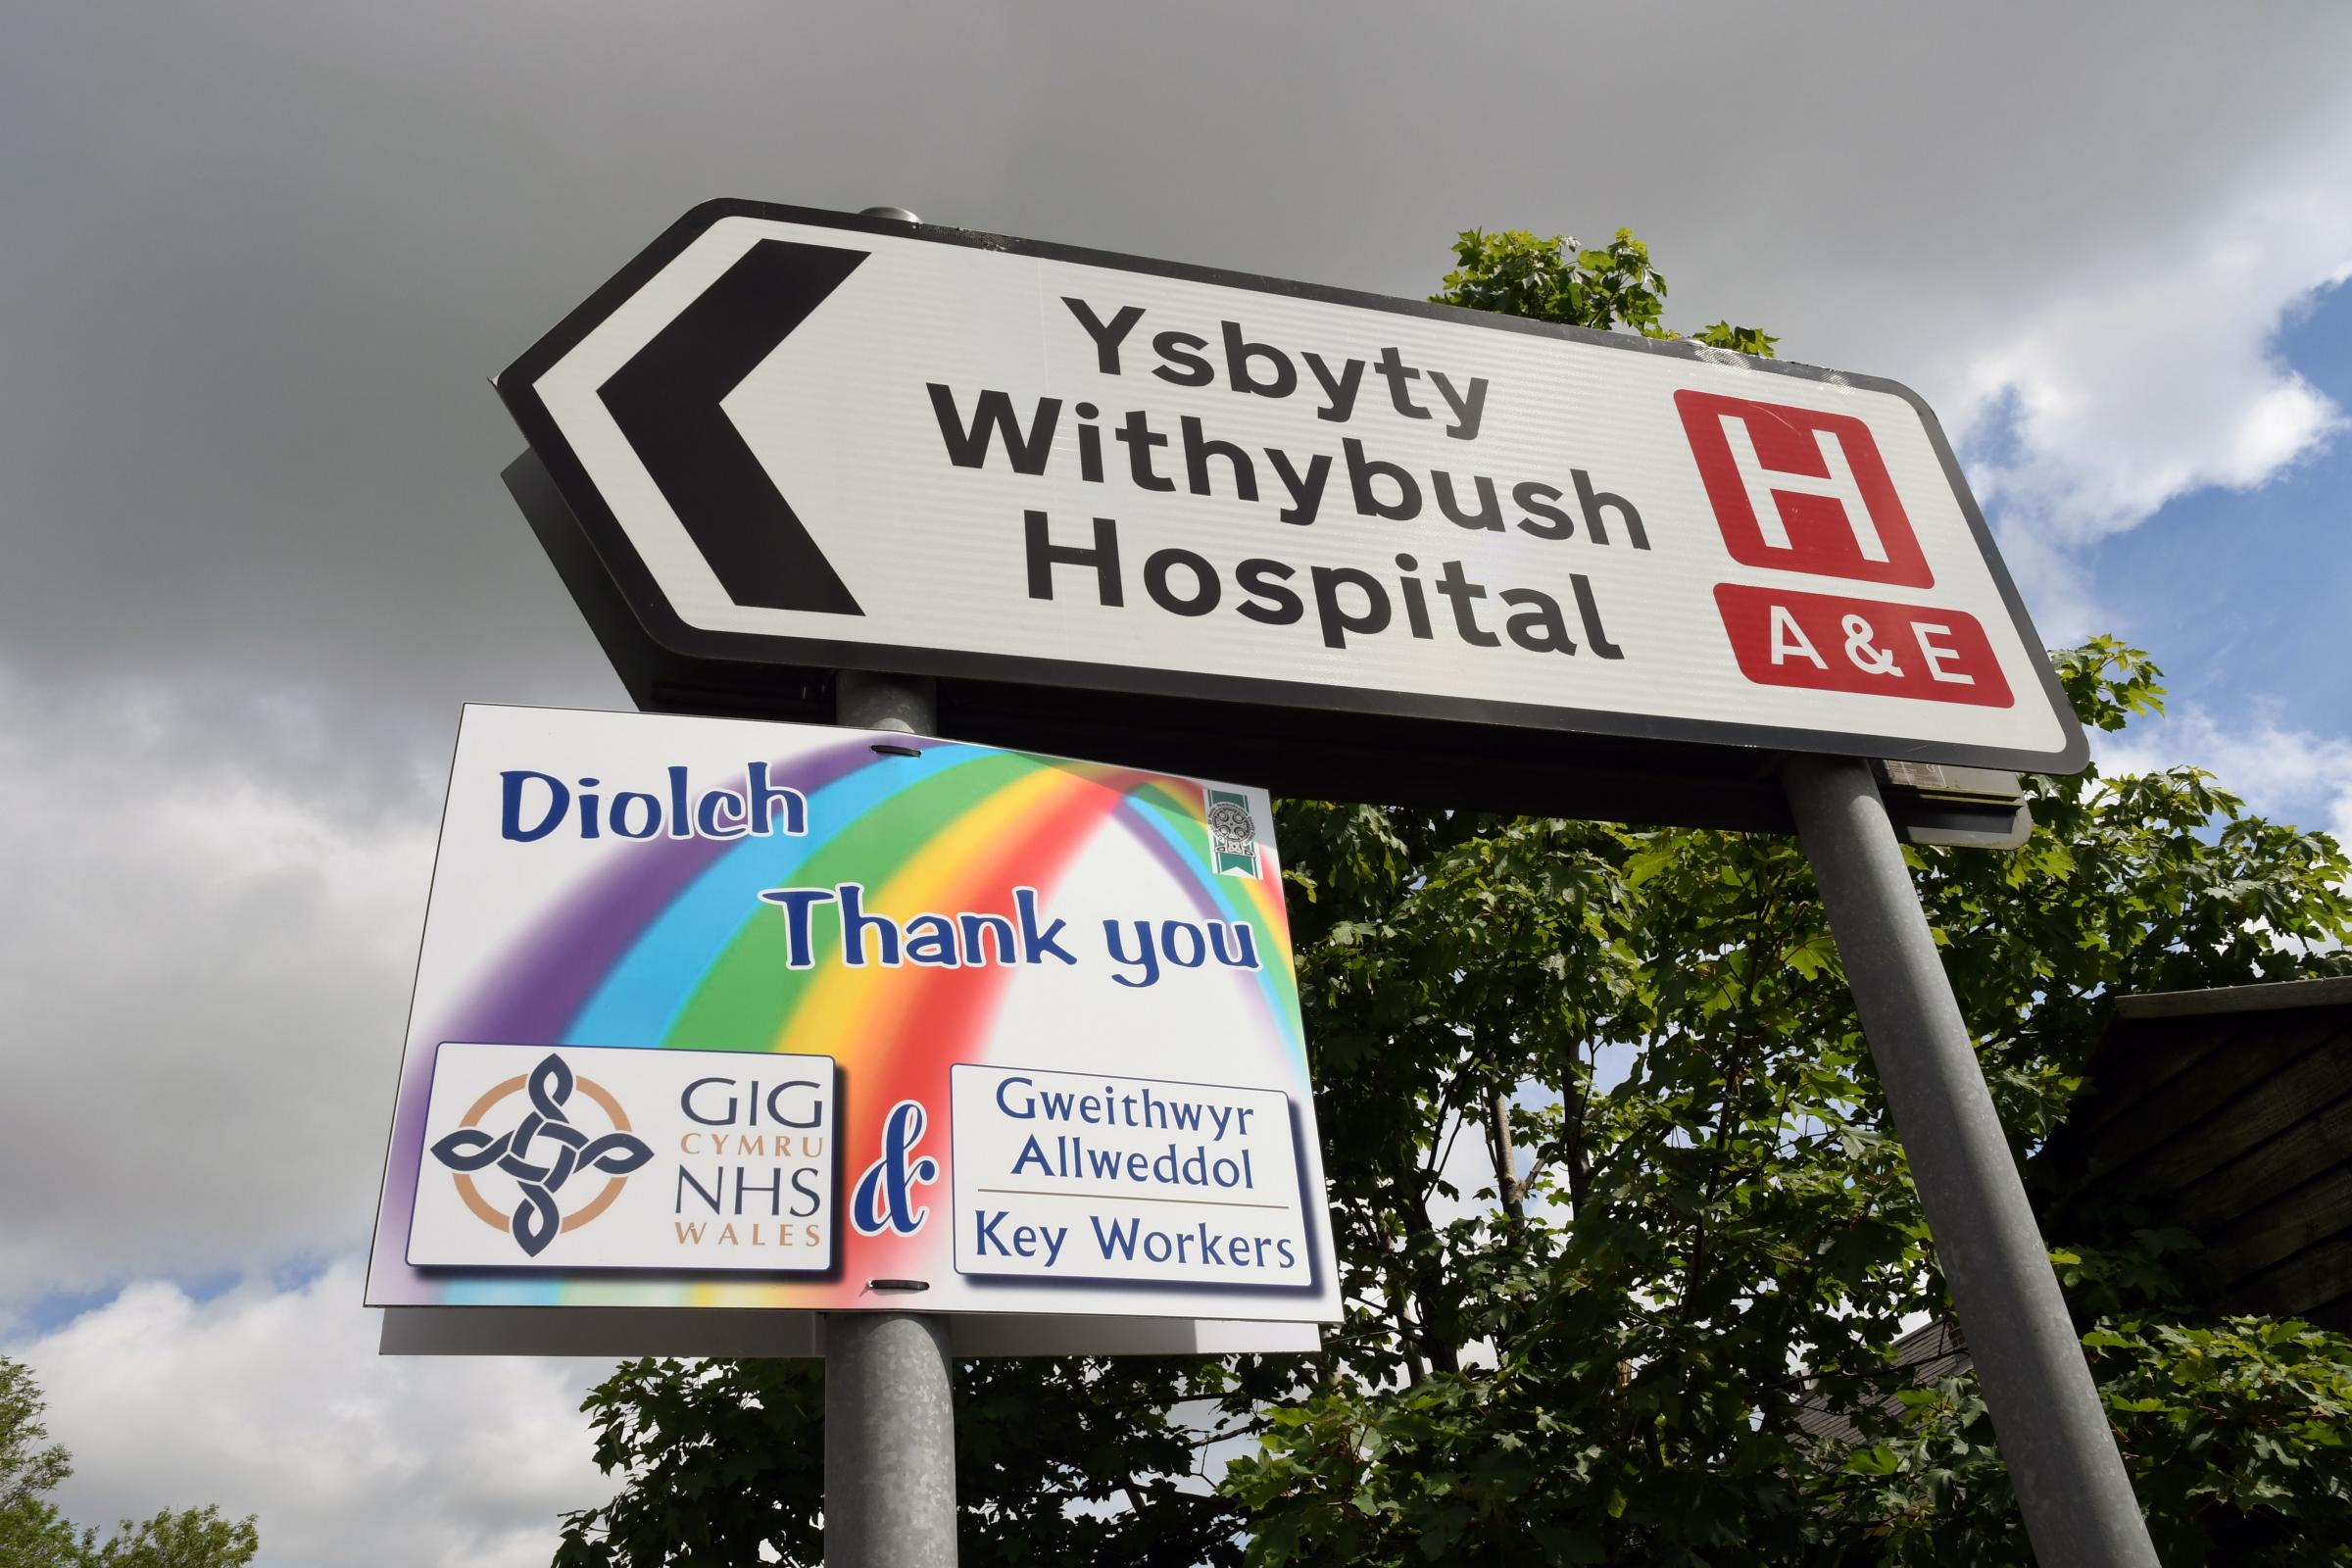 Signs thank NHS staff and key workers | Western Telegraph